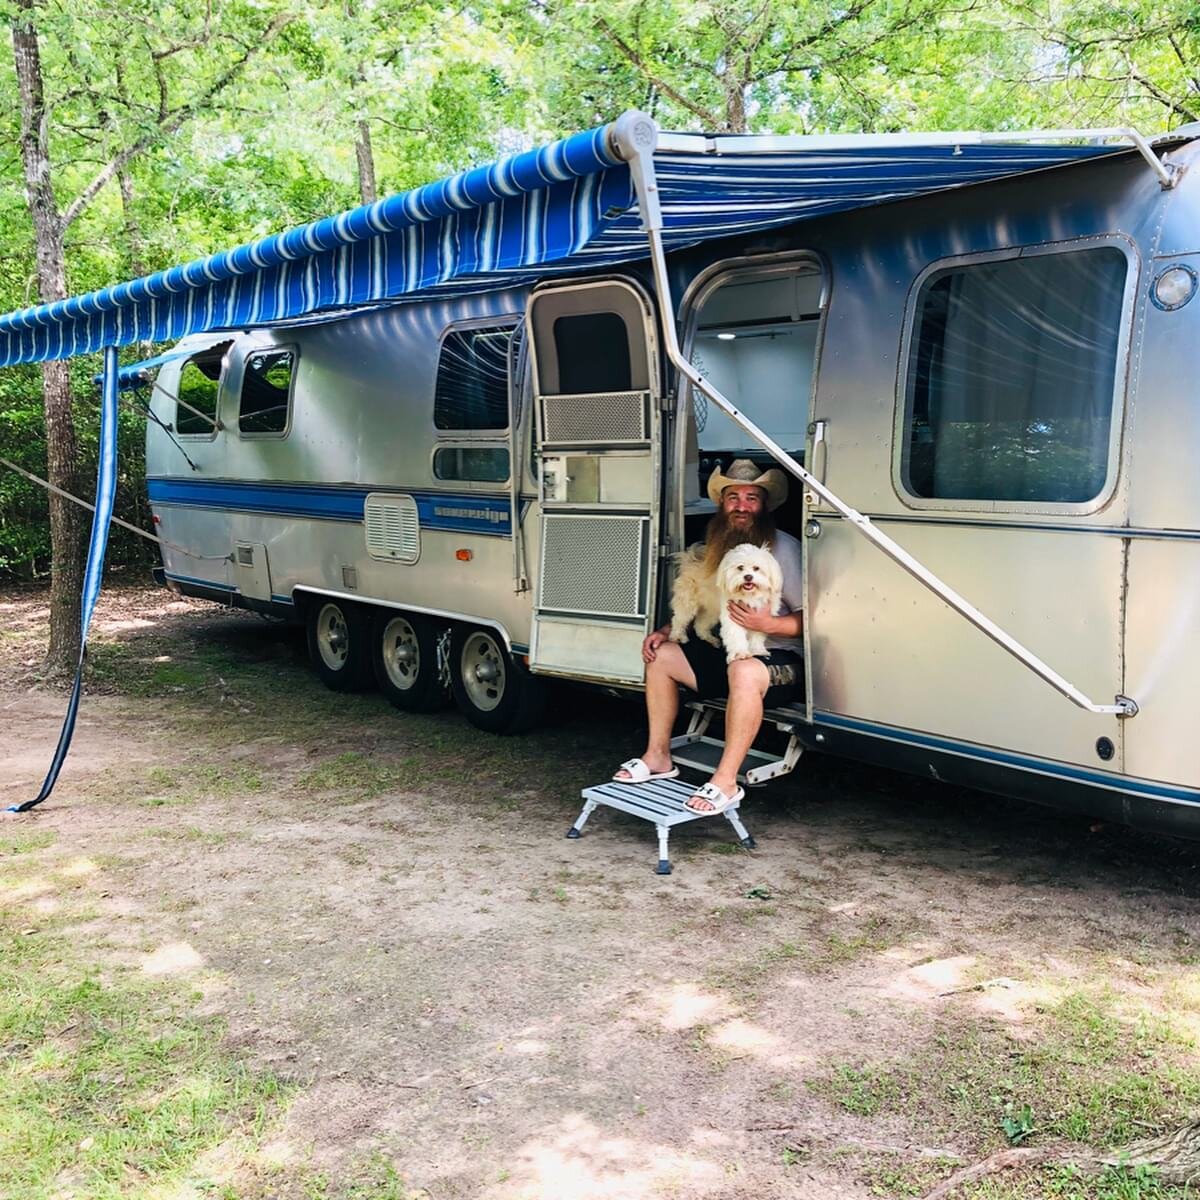 Quarantine Camping at home. 🏕What better way to celebrate Friday by hitching up and moving your rig across the property for a change of scenery?! We haven&rsquo;t camped in the airstream since our big December trip, so needless to say, we missed it!